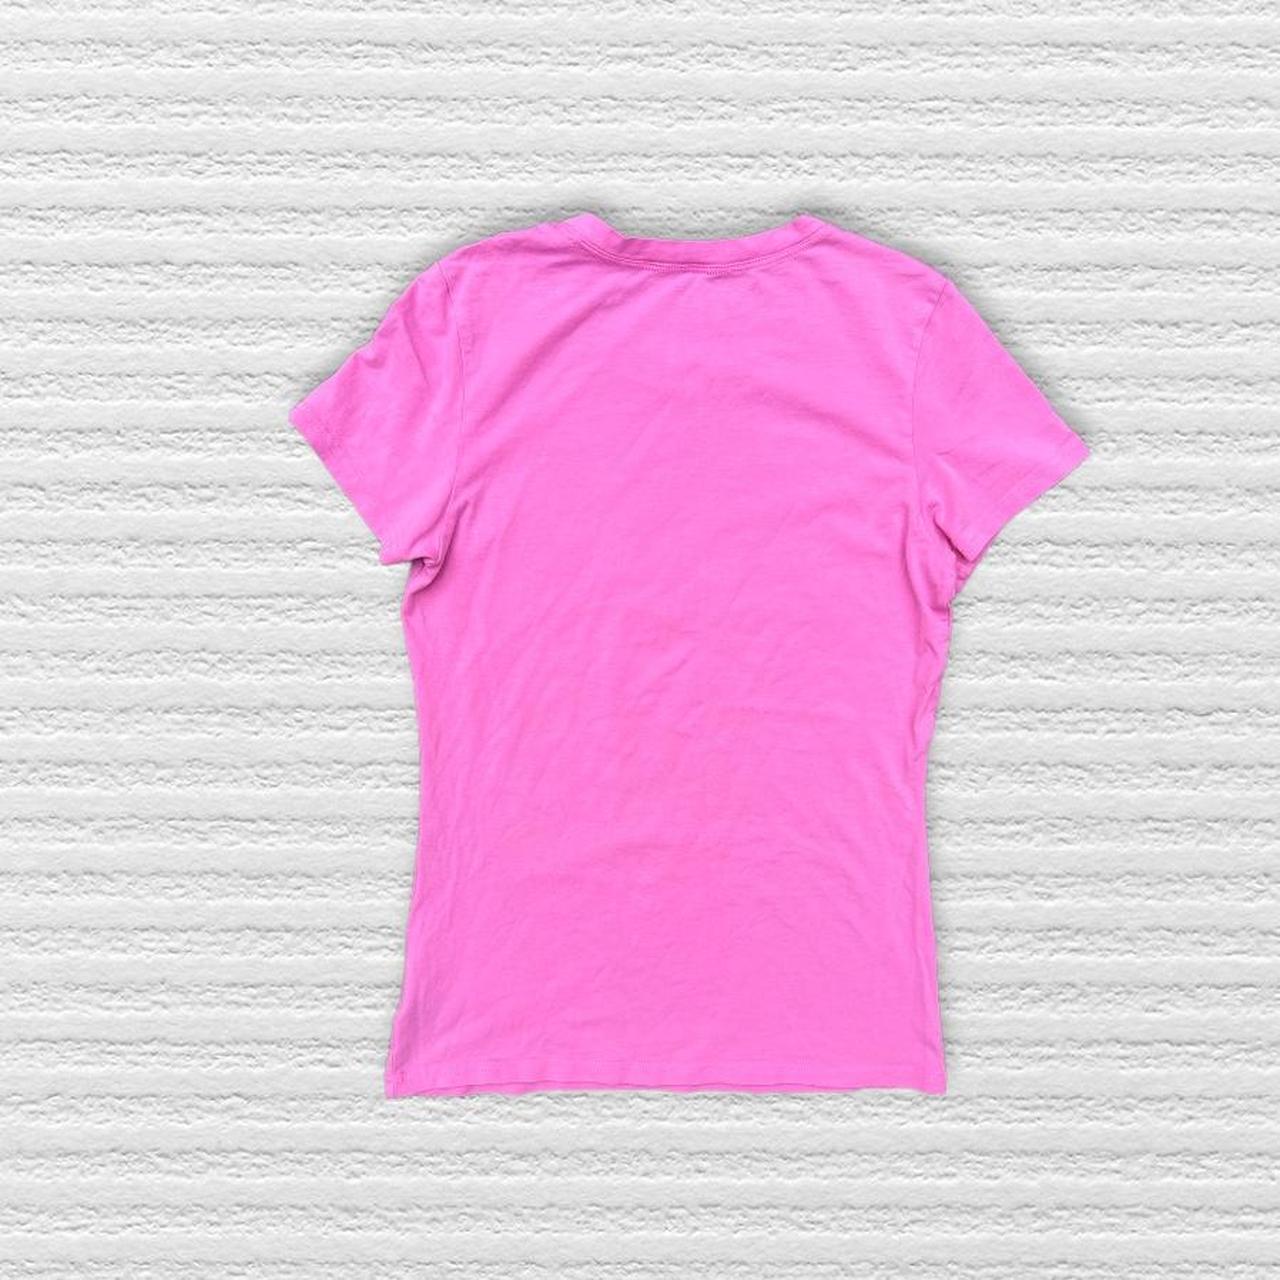 3LAB Women's Pink and White T-shirt (2)